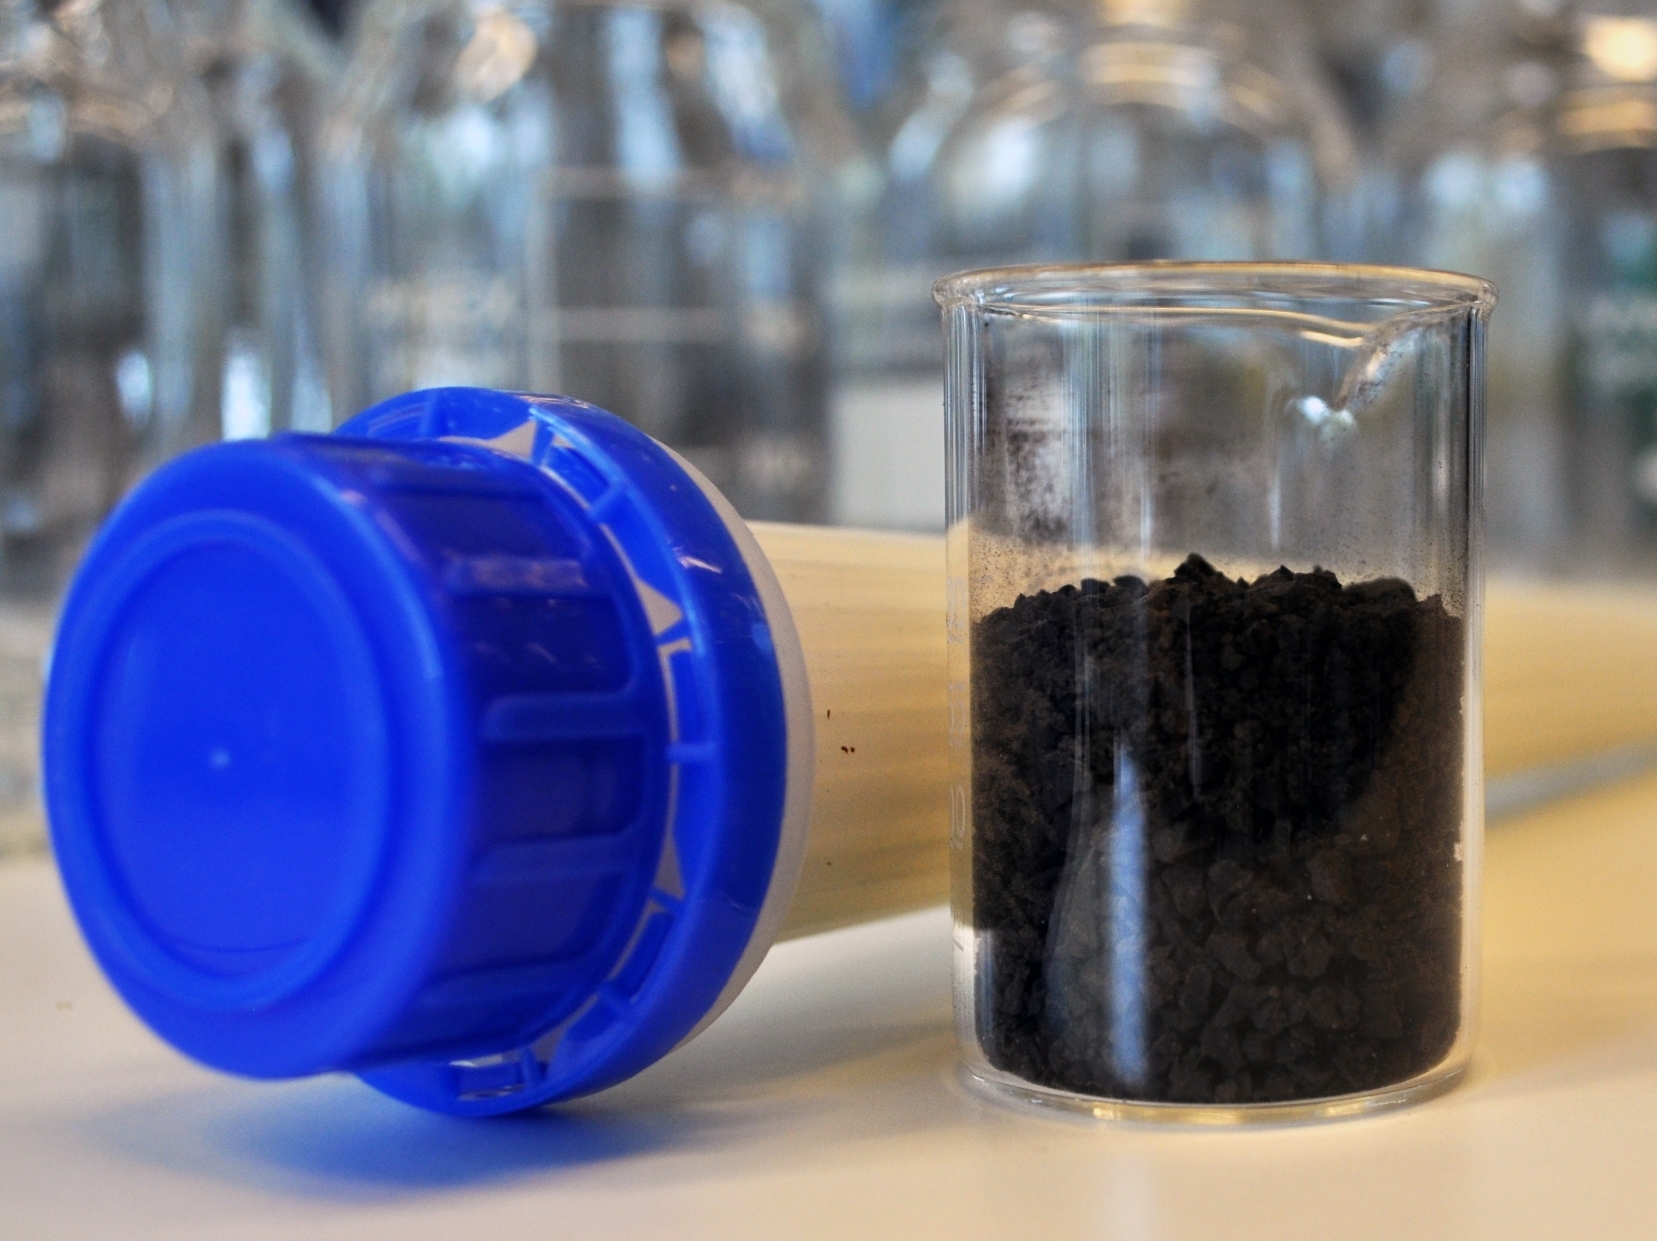 Bio carbon photographed in a research laboratory at Umeå University. Photo by Eva Weidemann.